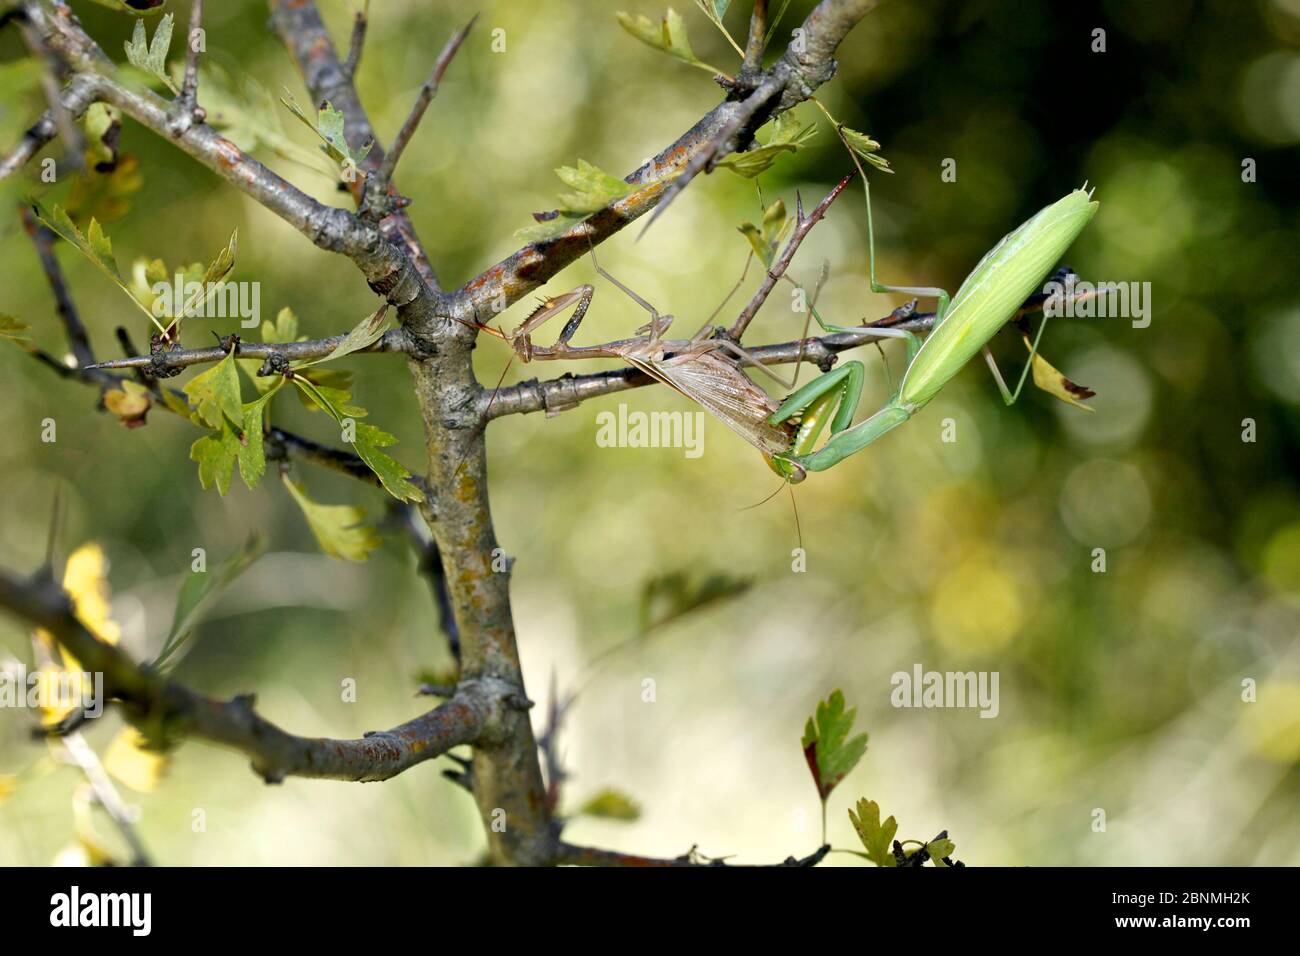 European praying mantis female (Mantis religiosa) eating a male after mating, Vaucluse, France, September. Stock Photo